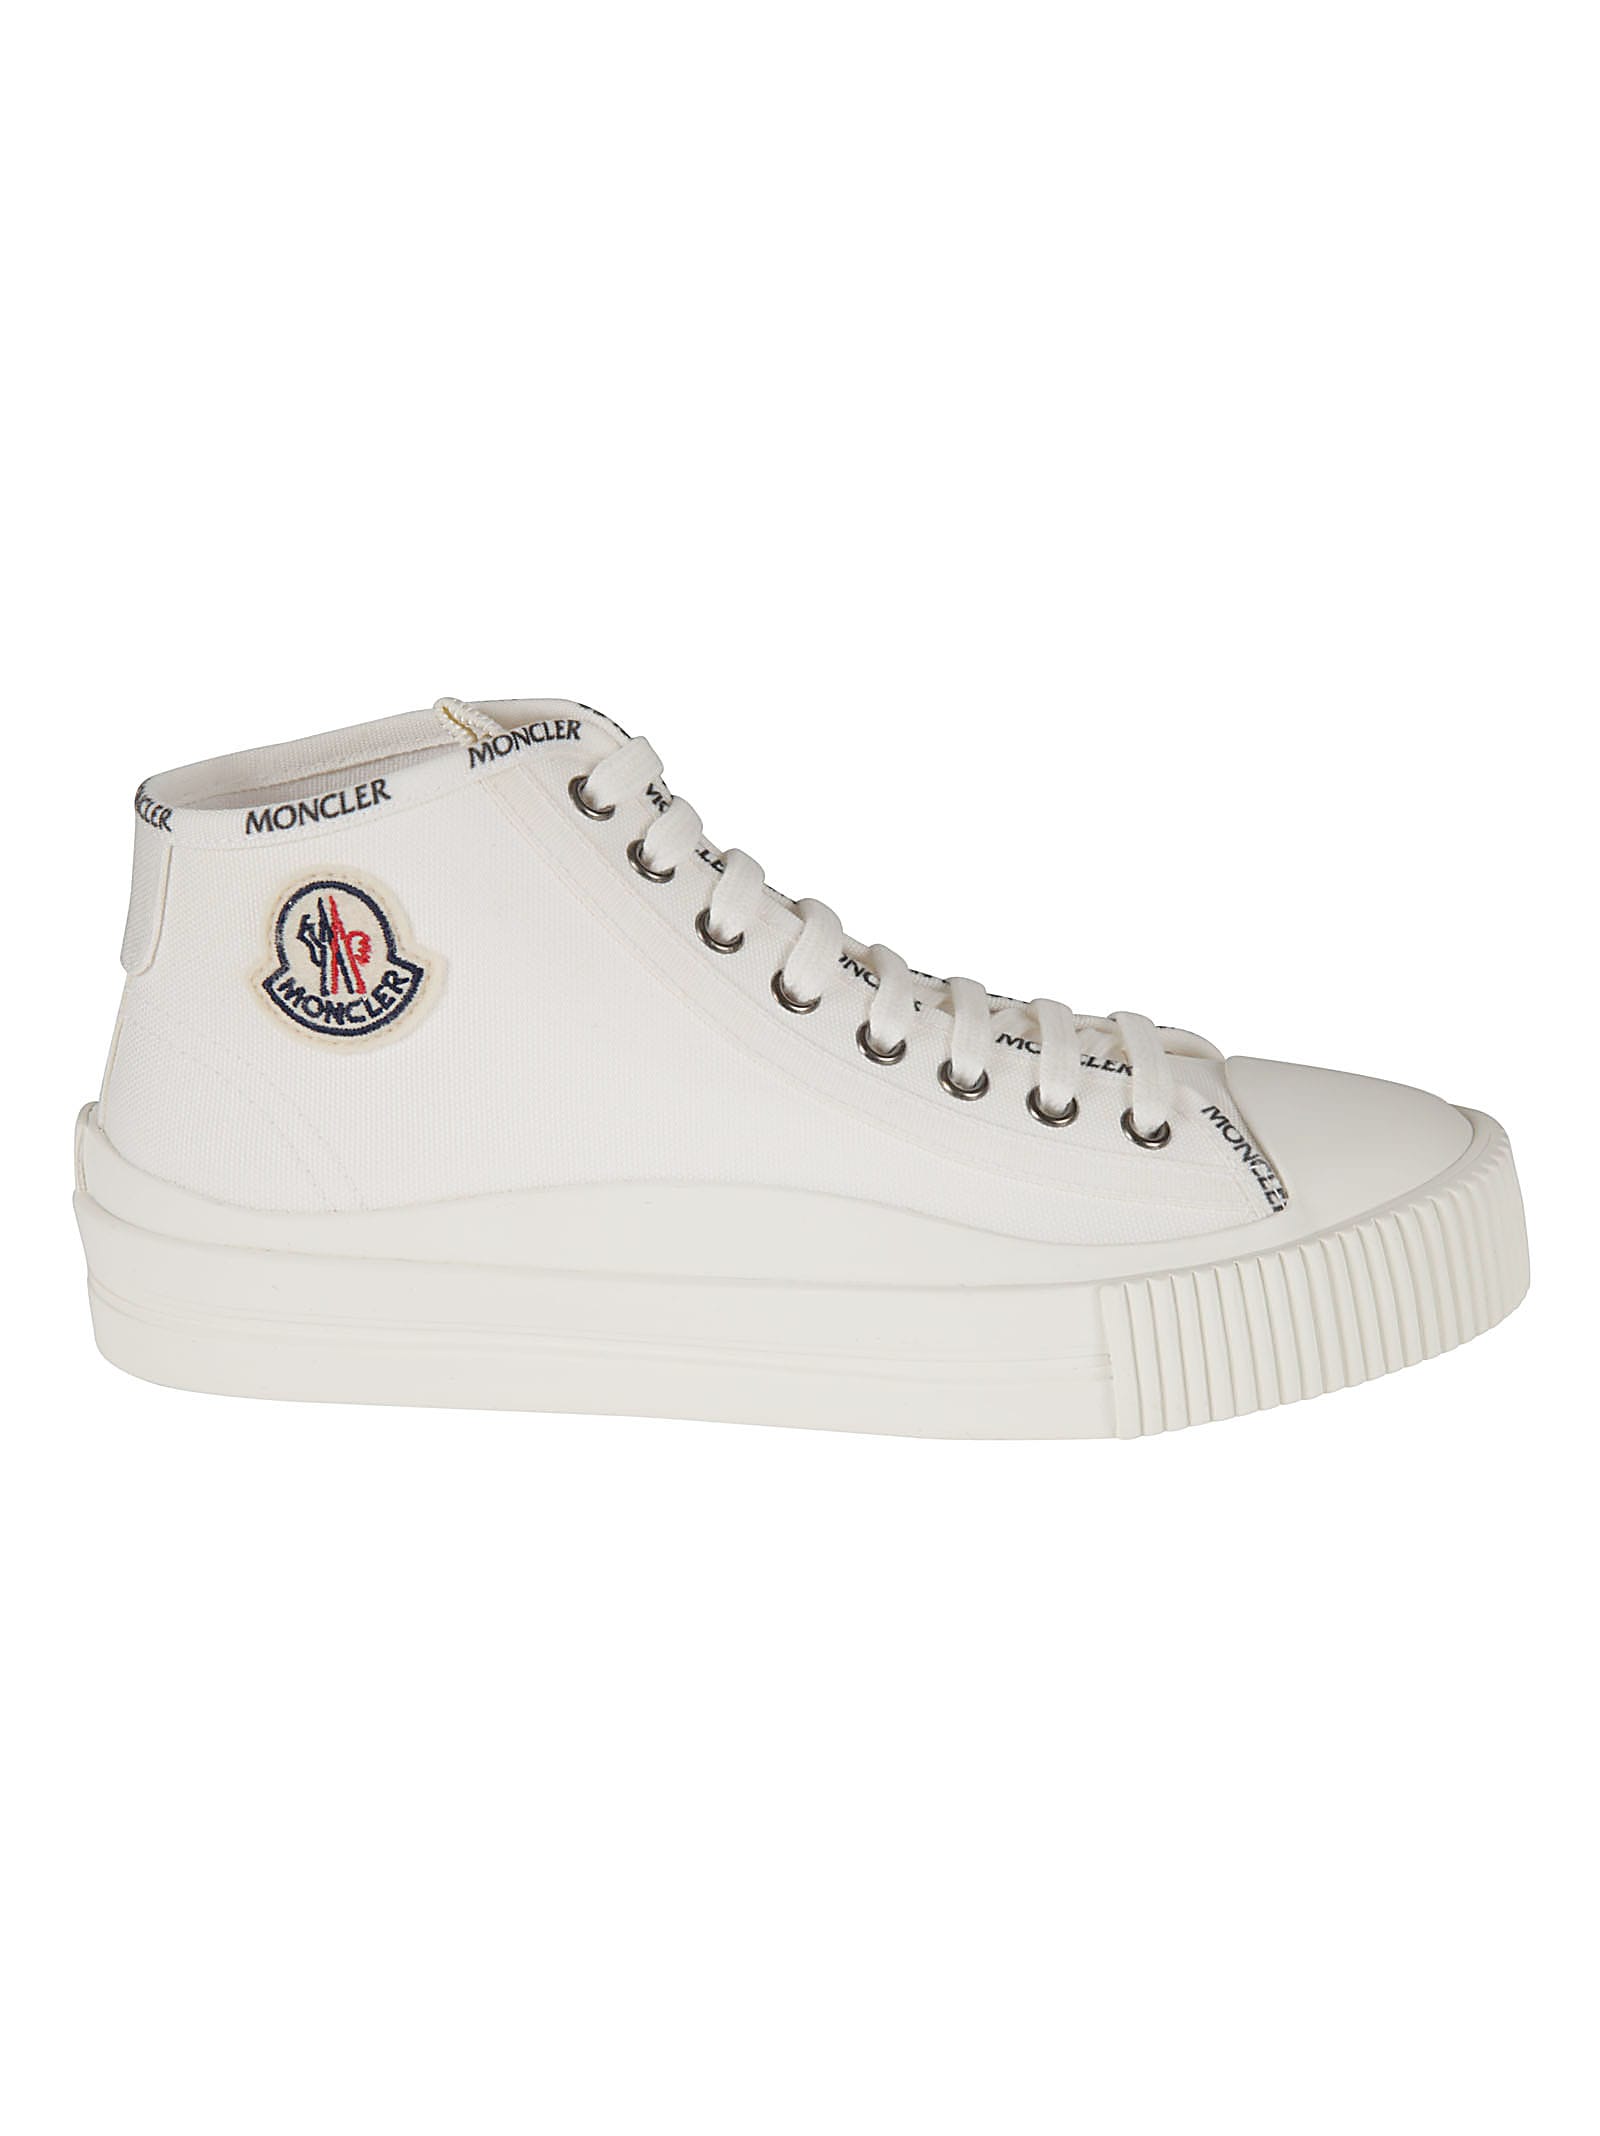 Buy Moncler Lissex Sneakers online, shop Moncler shoes with free shipping